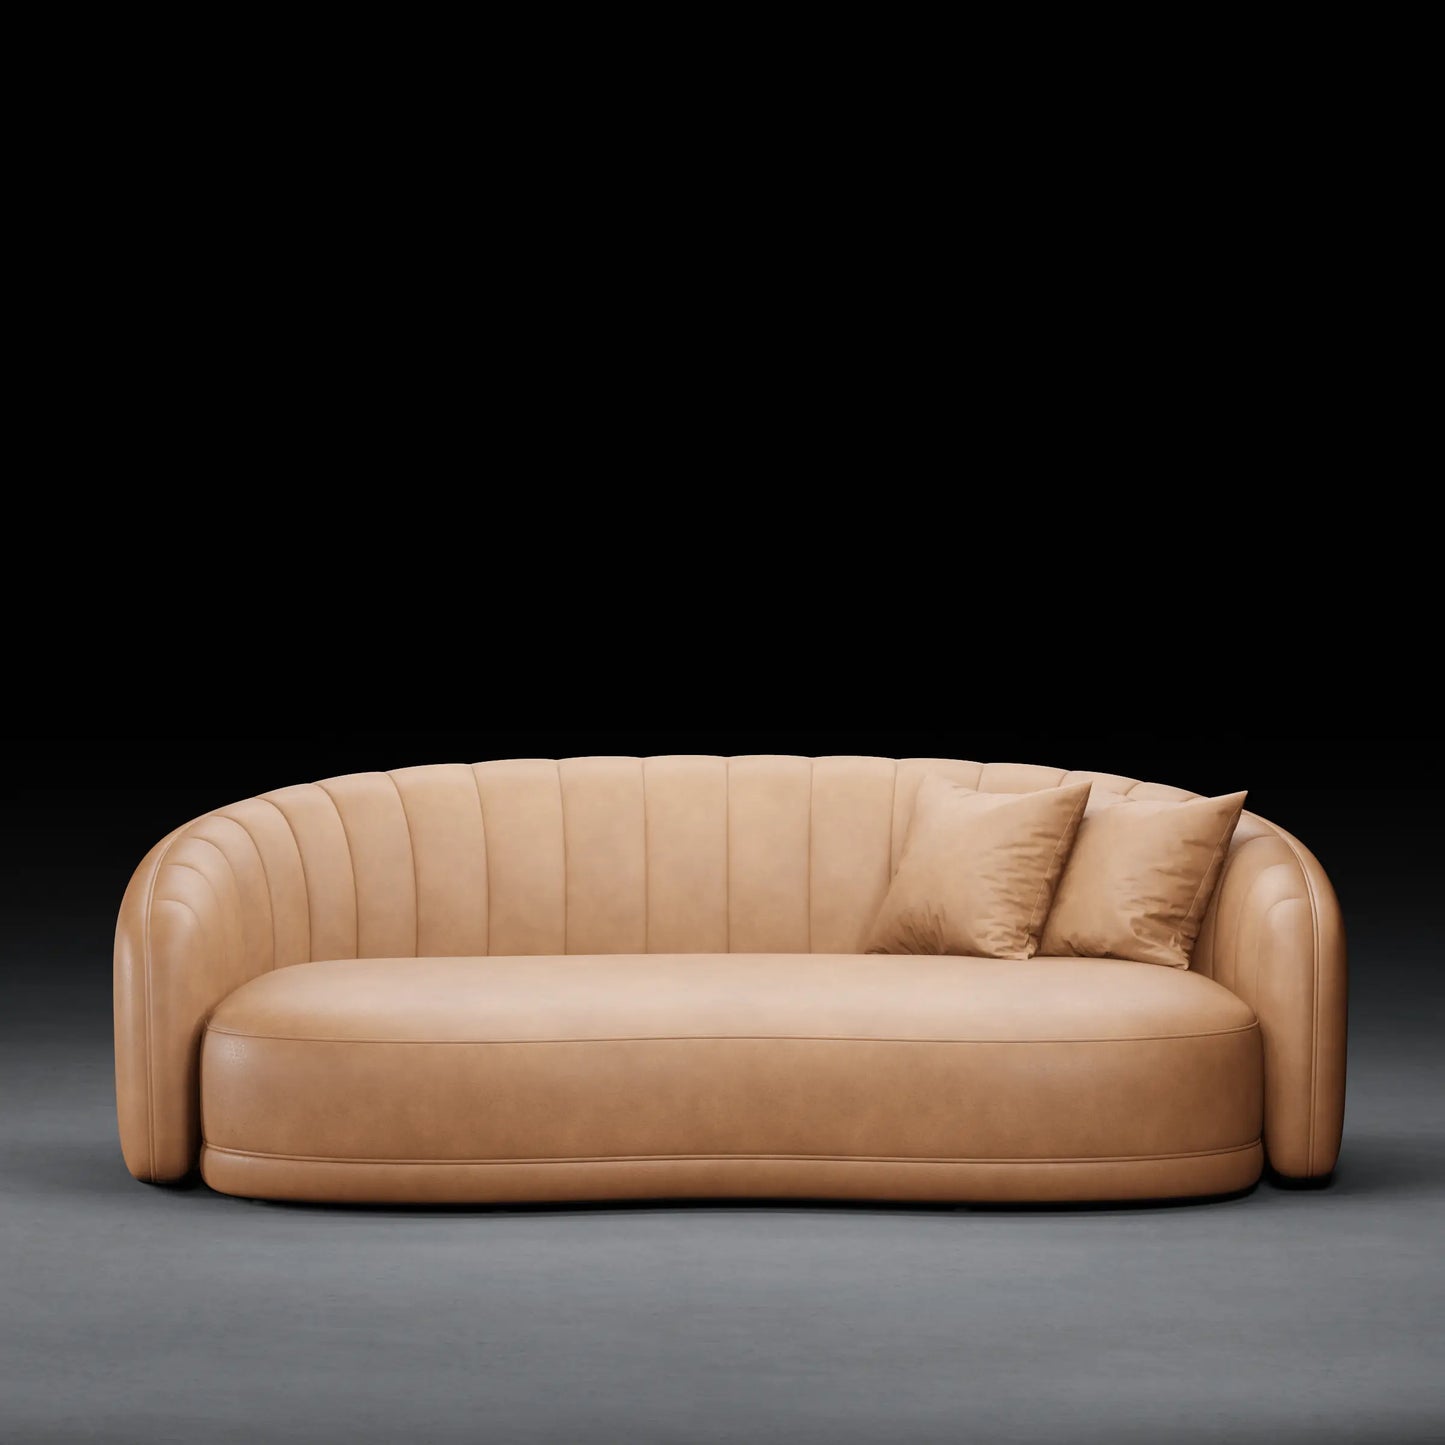 LILY - 3 Seater Couch in Leather Finish | Tan Color